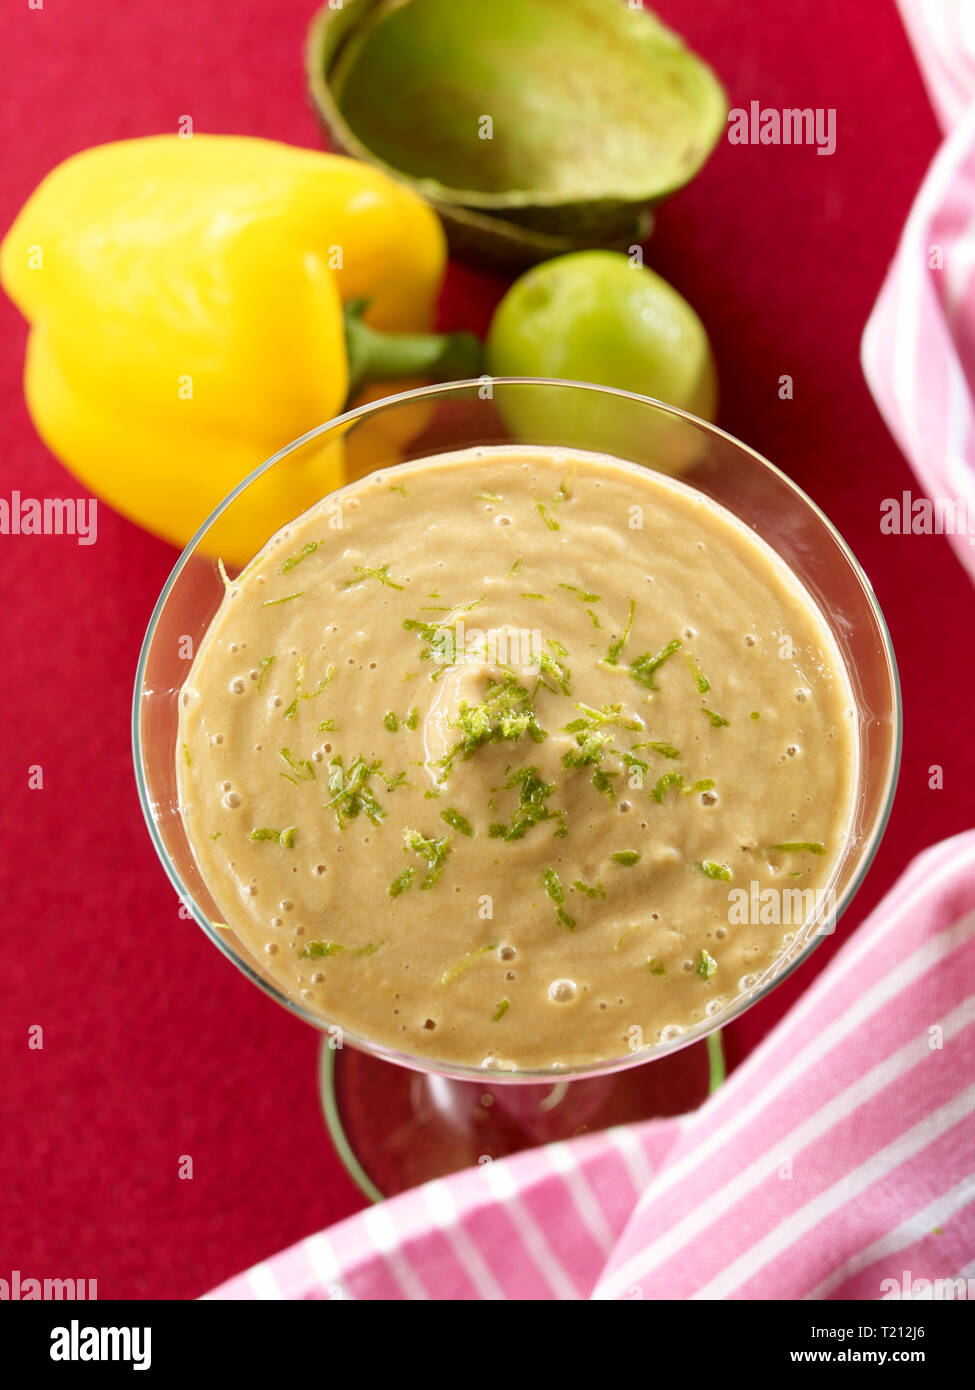 Avocado paprika drink in glass, low carb Stock Photo